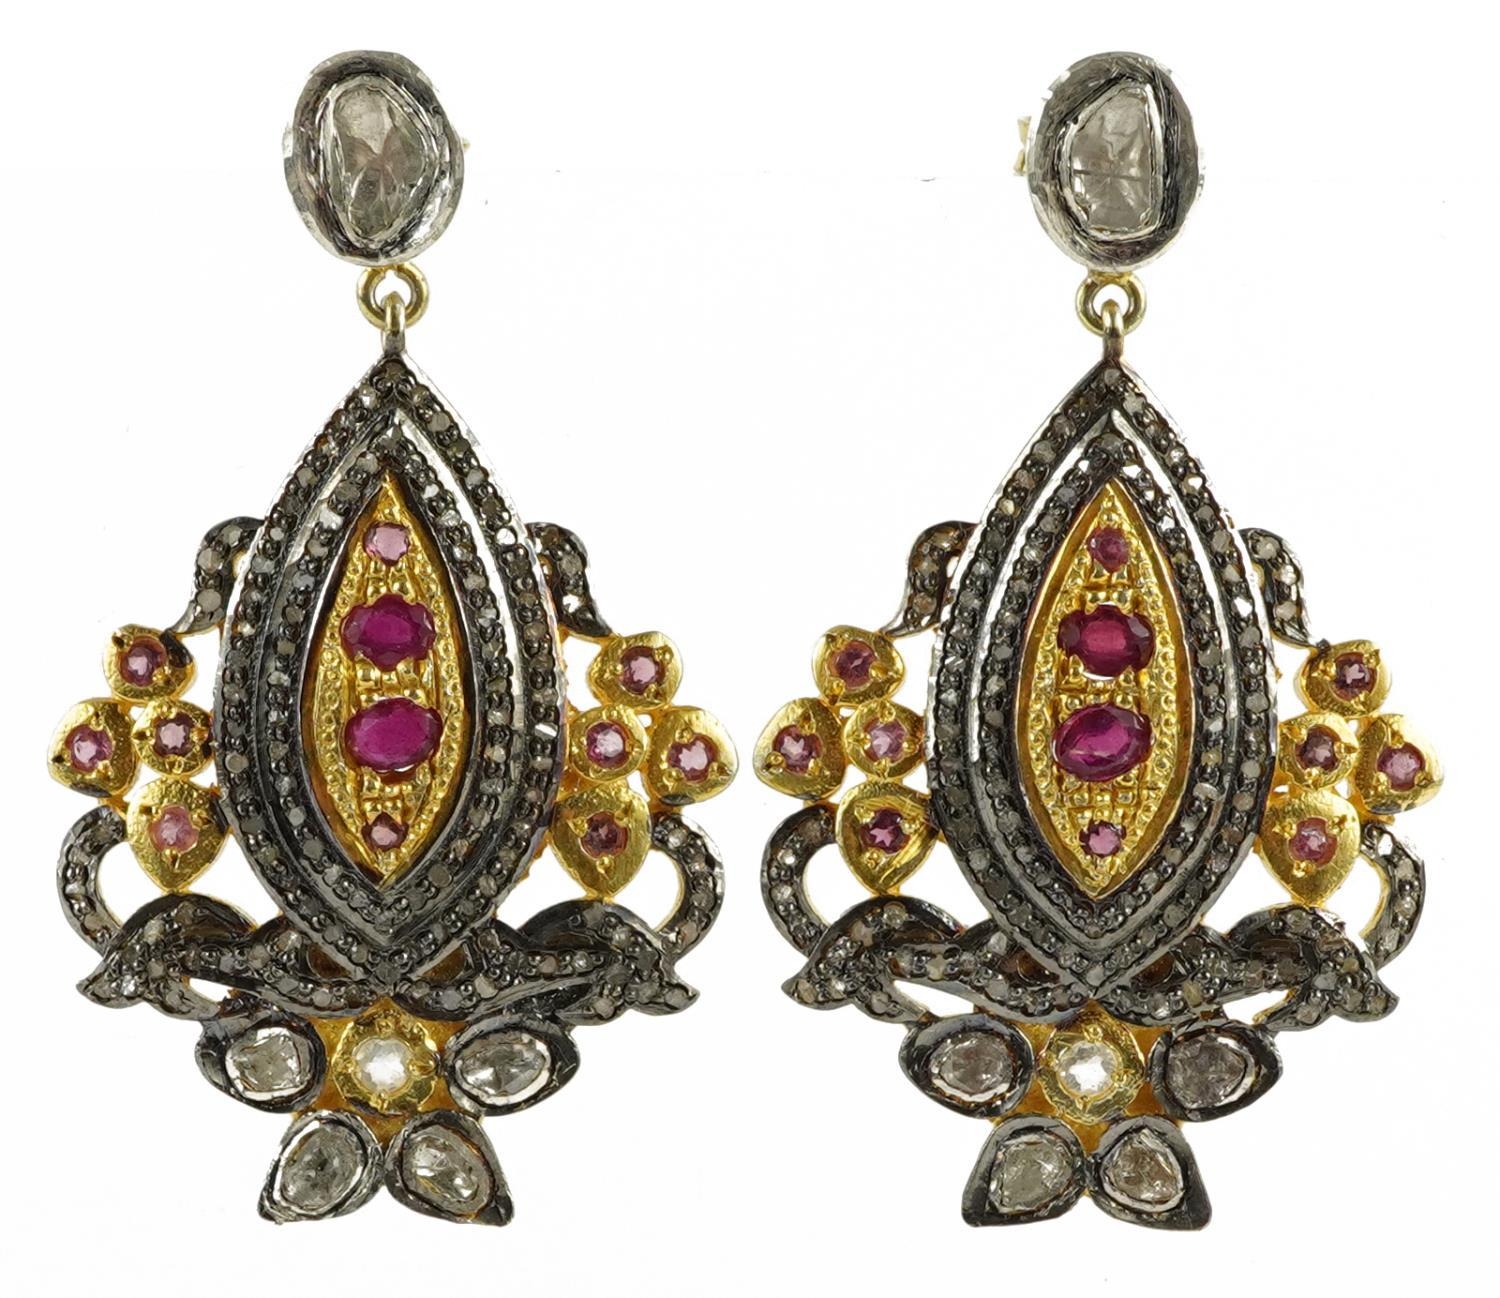 Pair of large Indian silver gilt diamond drop earrings set with rubies and garnets, 5cm high, 23.0g